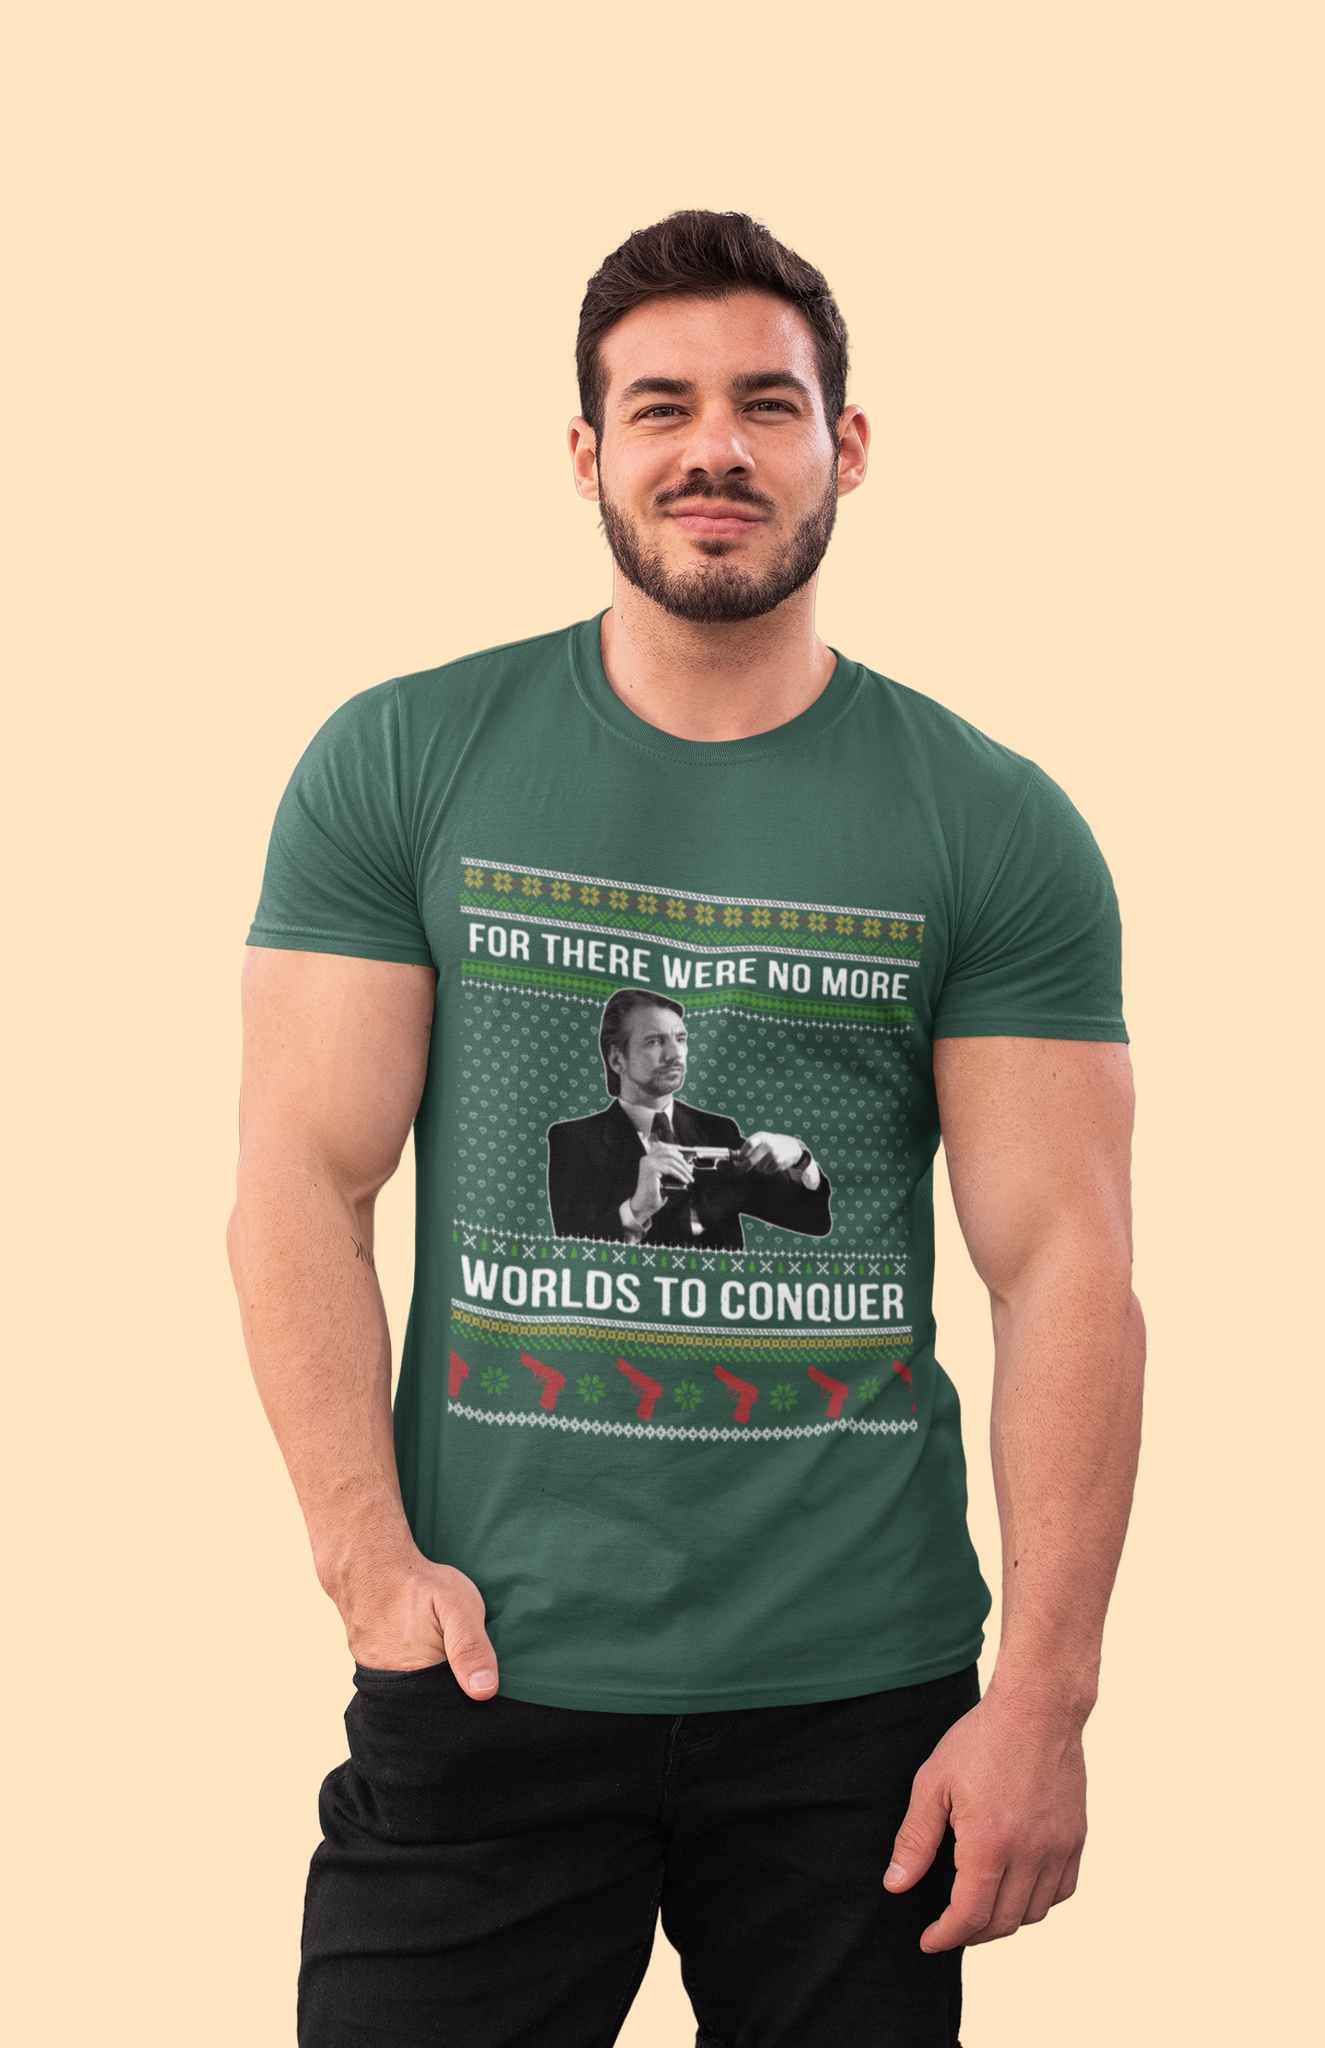 Die Hard Ugly Sweater Shirt, Hans Gruber T Shirt, For There Were No More Worlds To Conquer Tshirt, Christmas Gifts